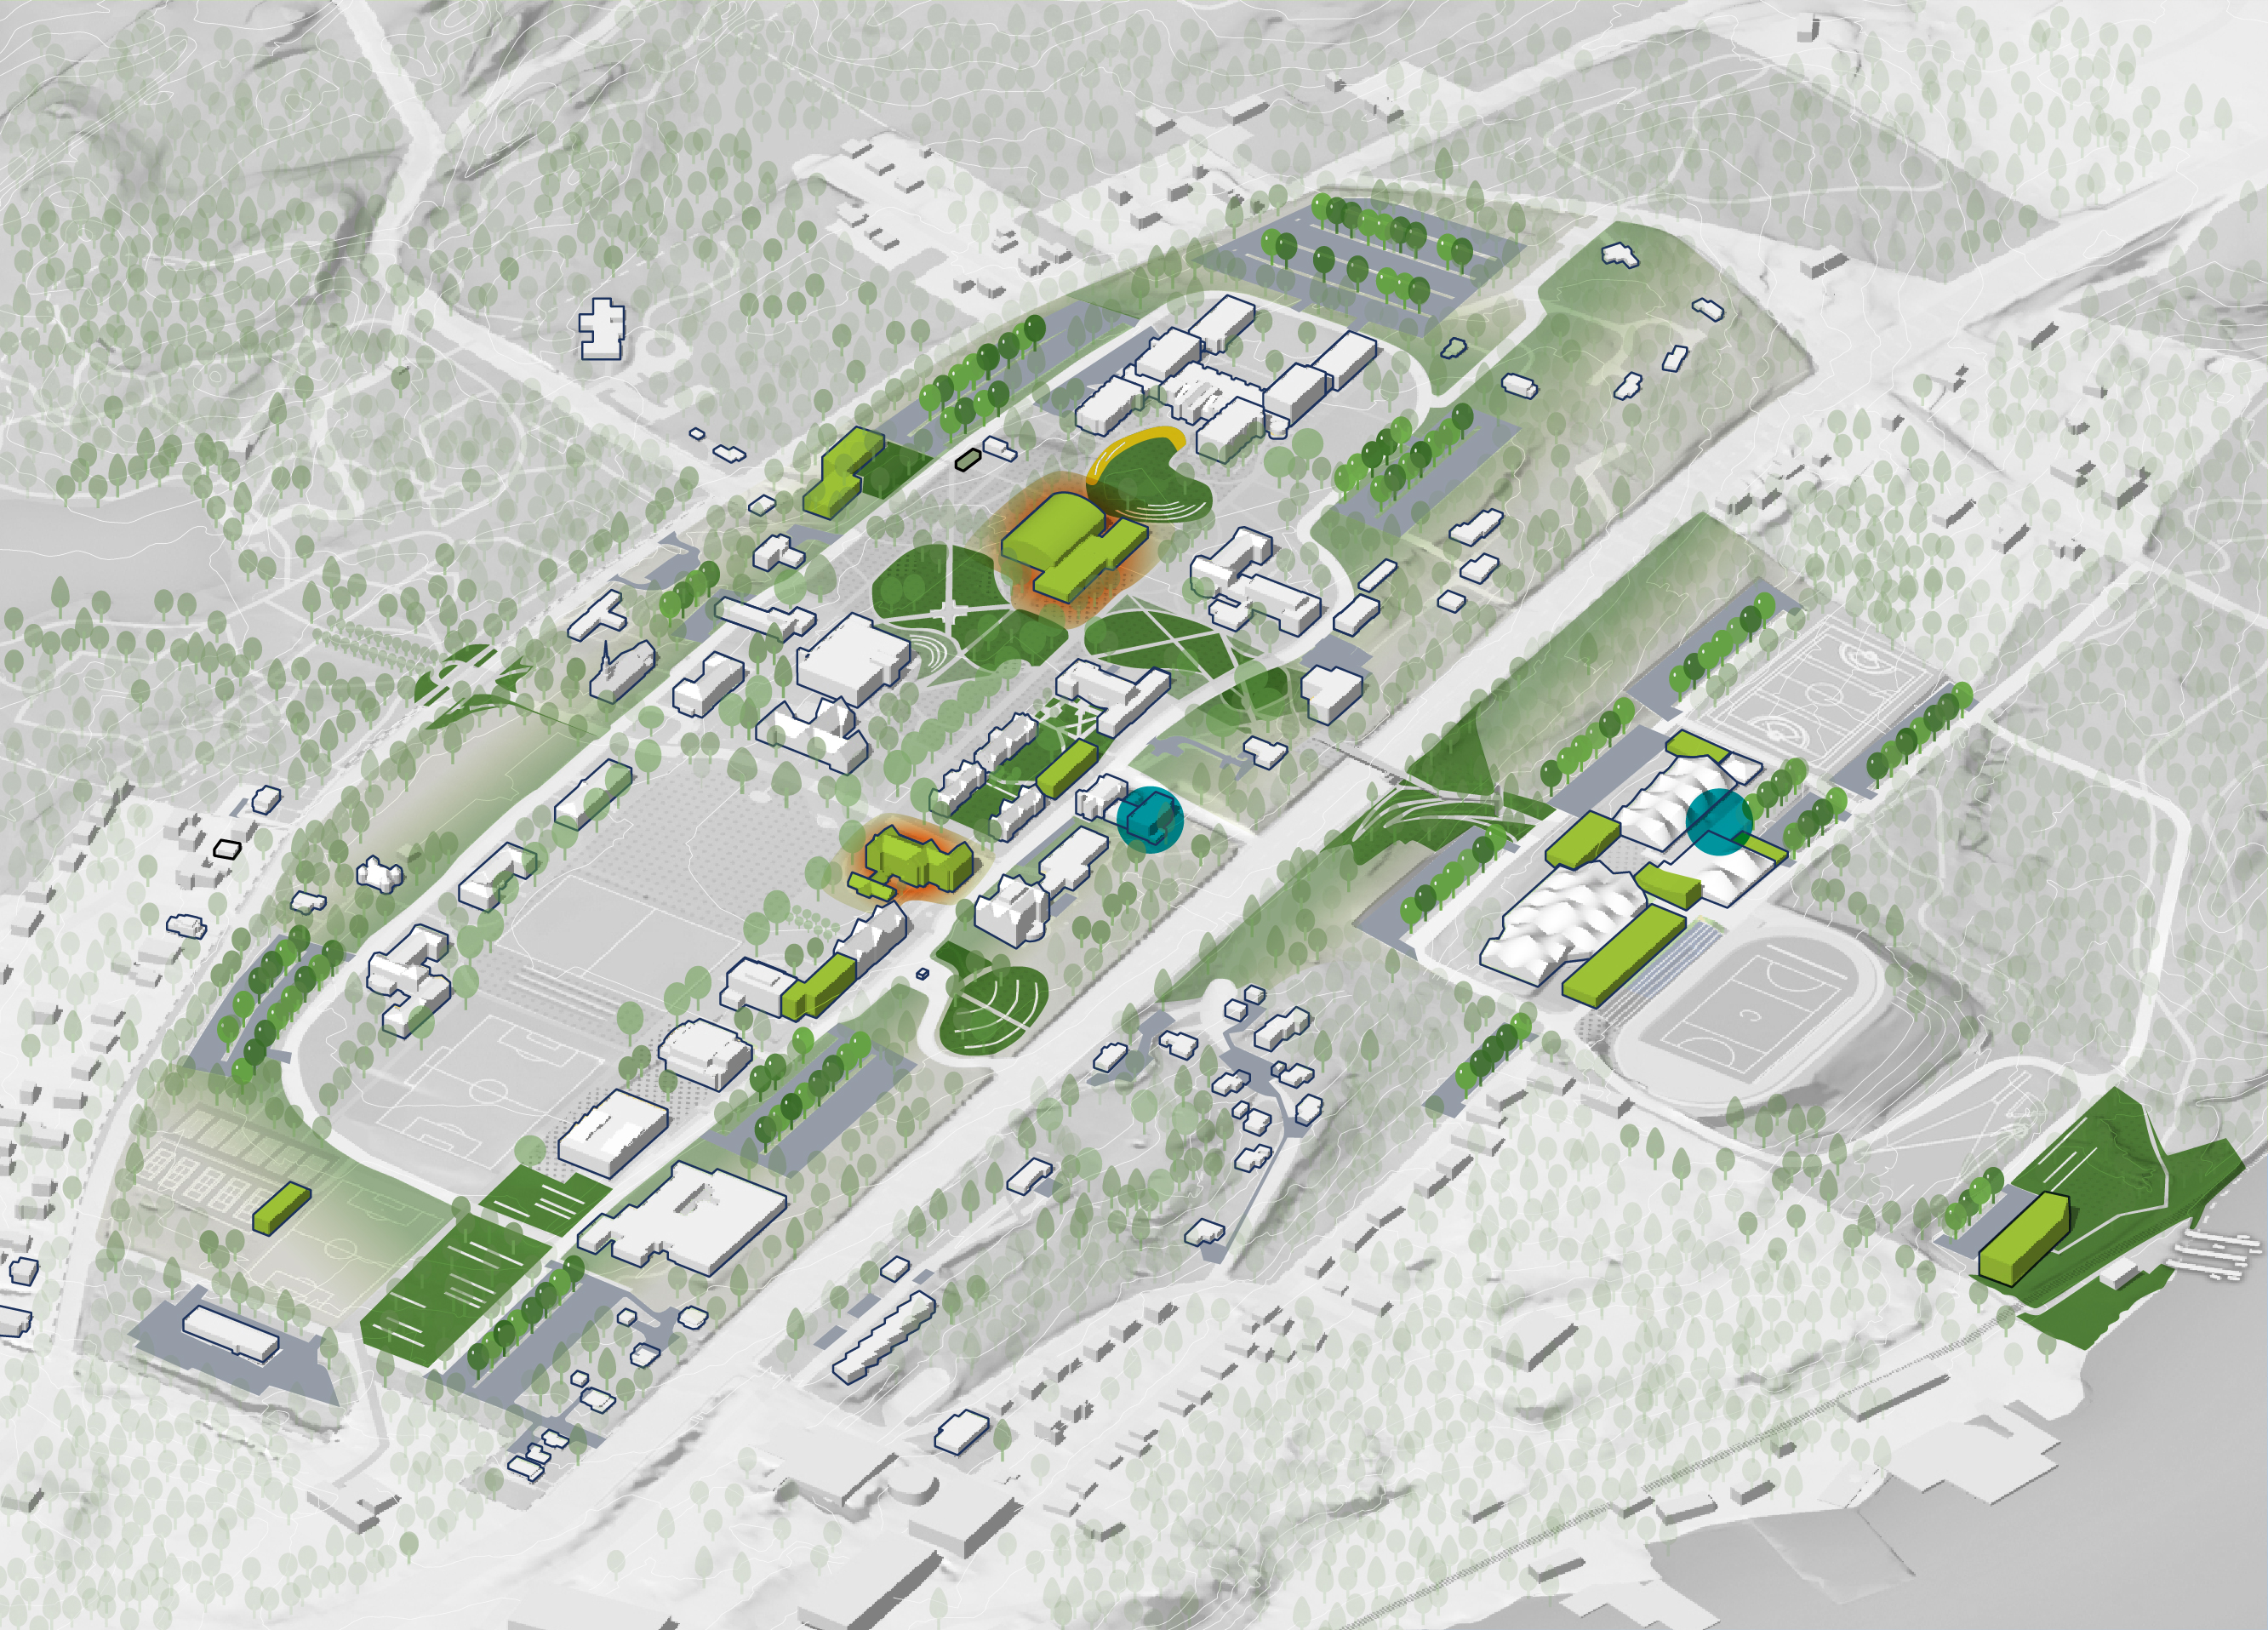 A concept rendering of proposed updates to mobility on campus.